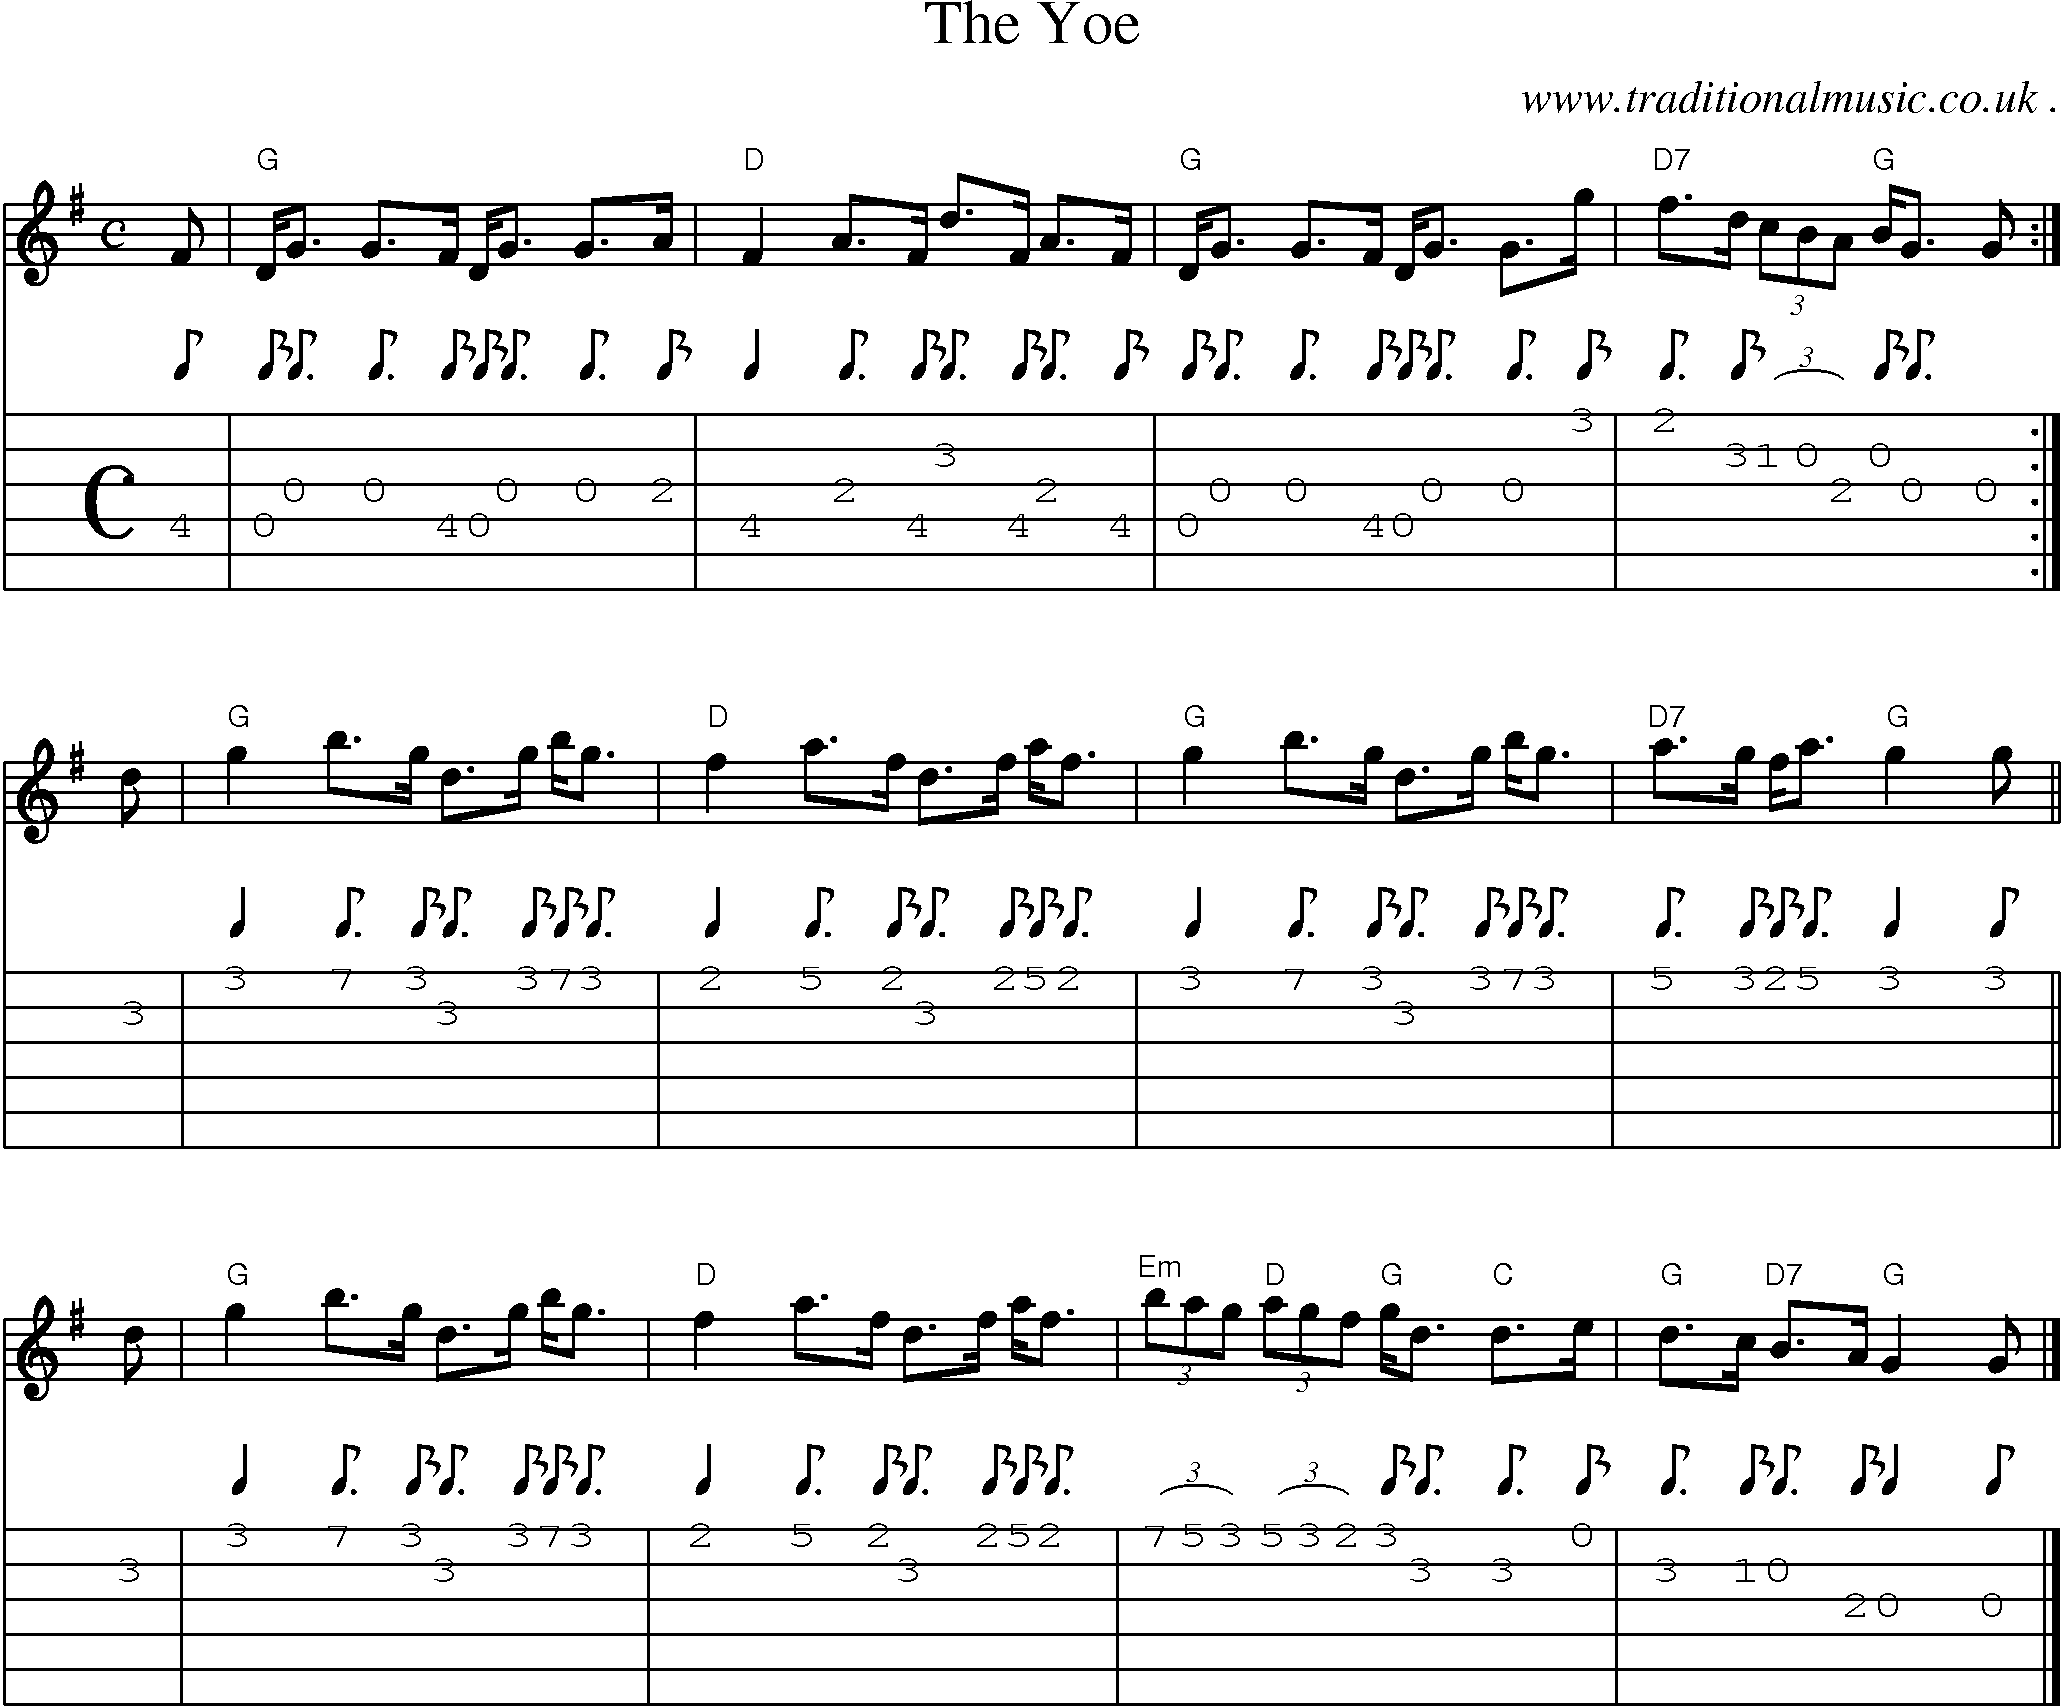 Sheet-music  score, Chords and Guitar Tabs for The Yoe